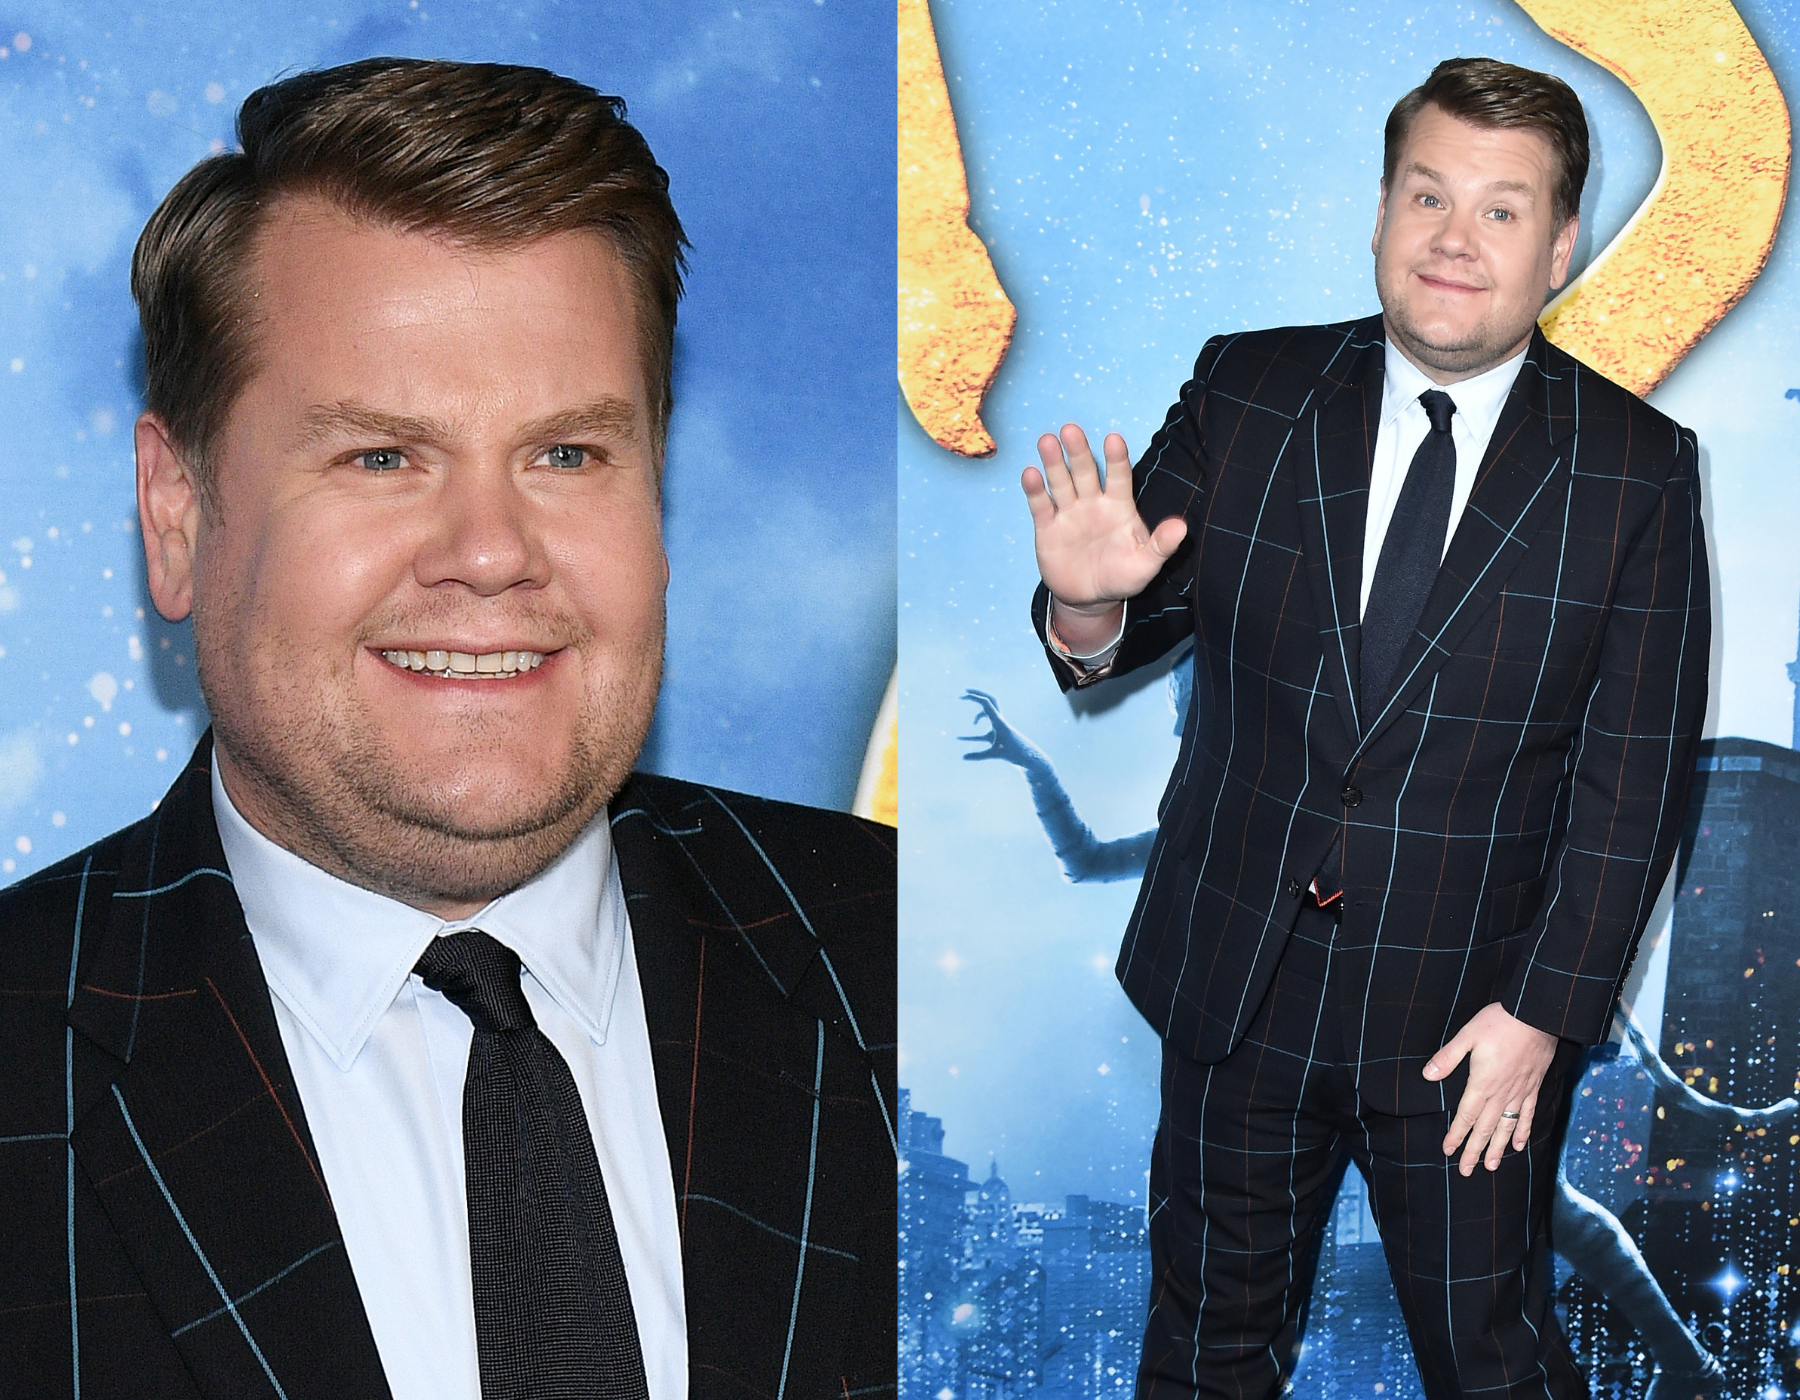 James Corden was once considered a national treasure